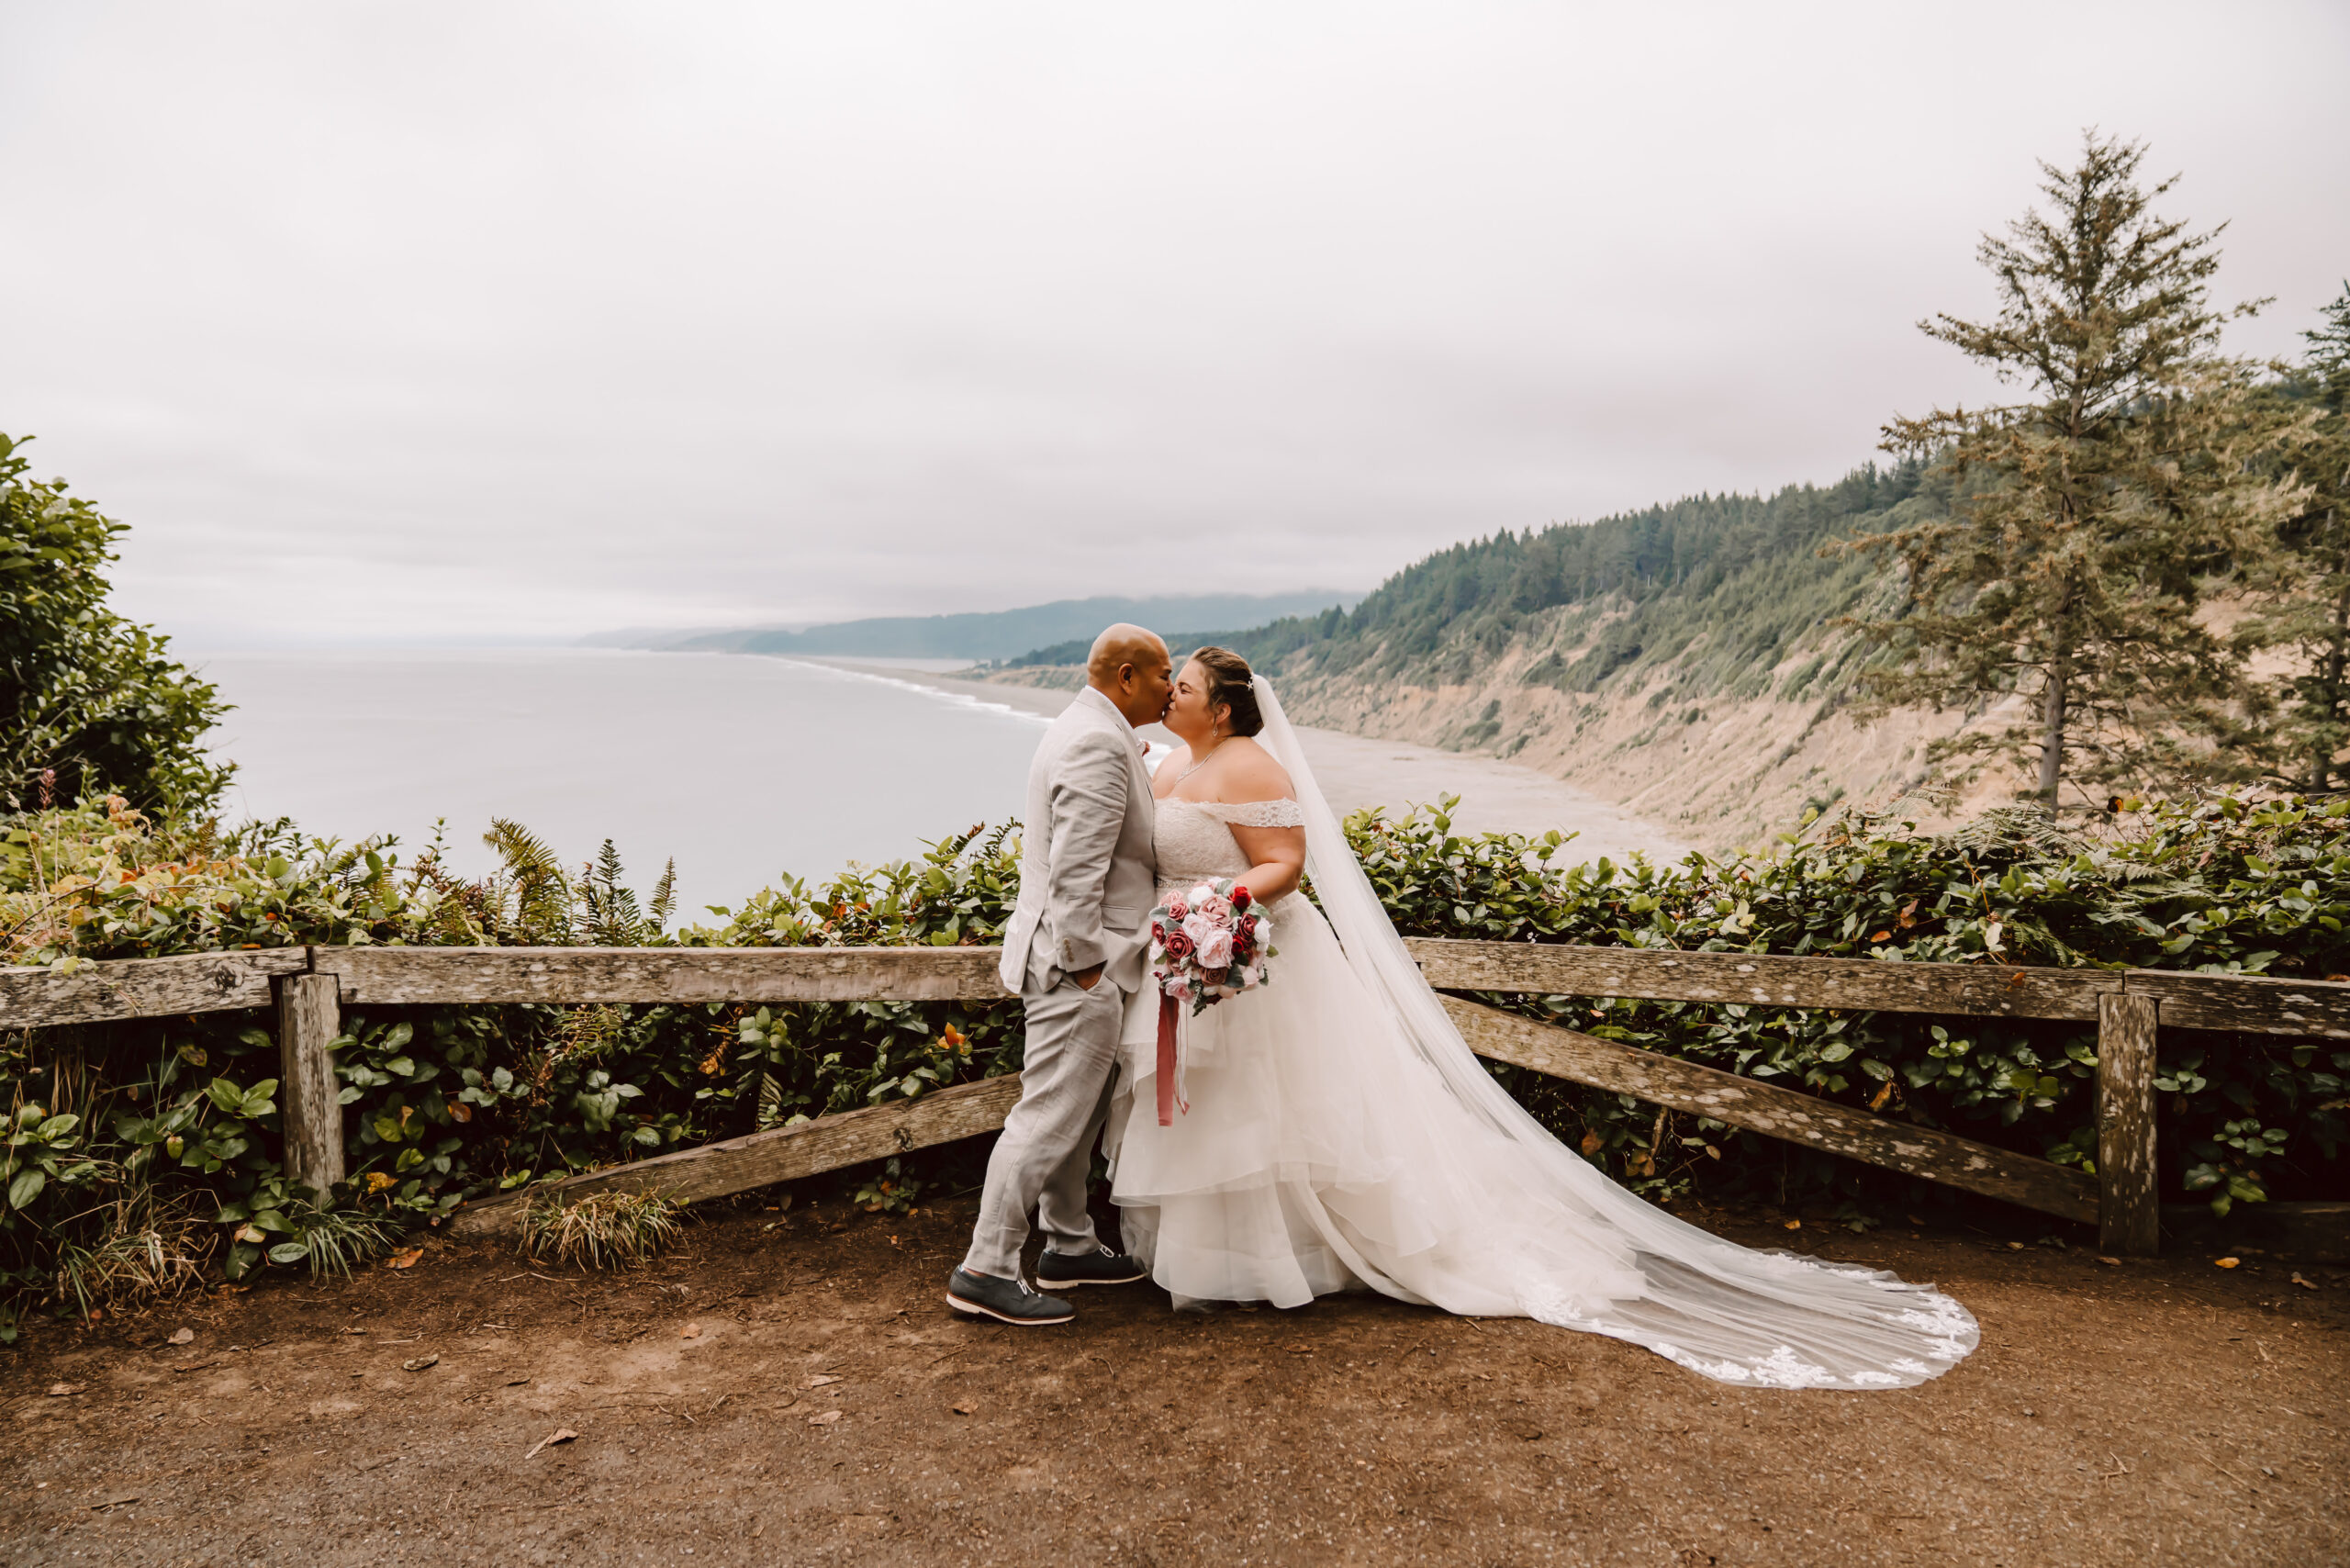 Bride and groom kissing overlooking the north coast of California for their elopement day 